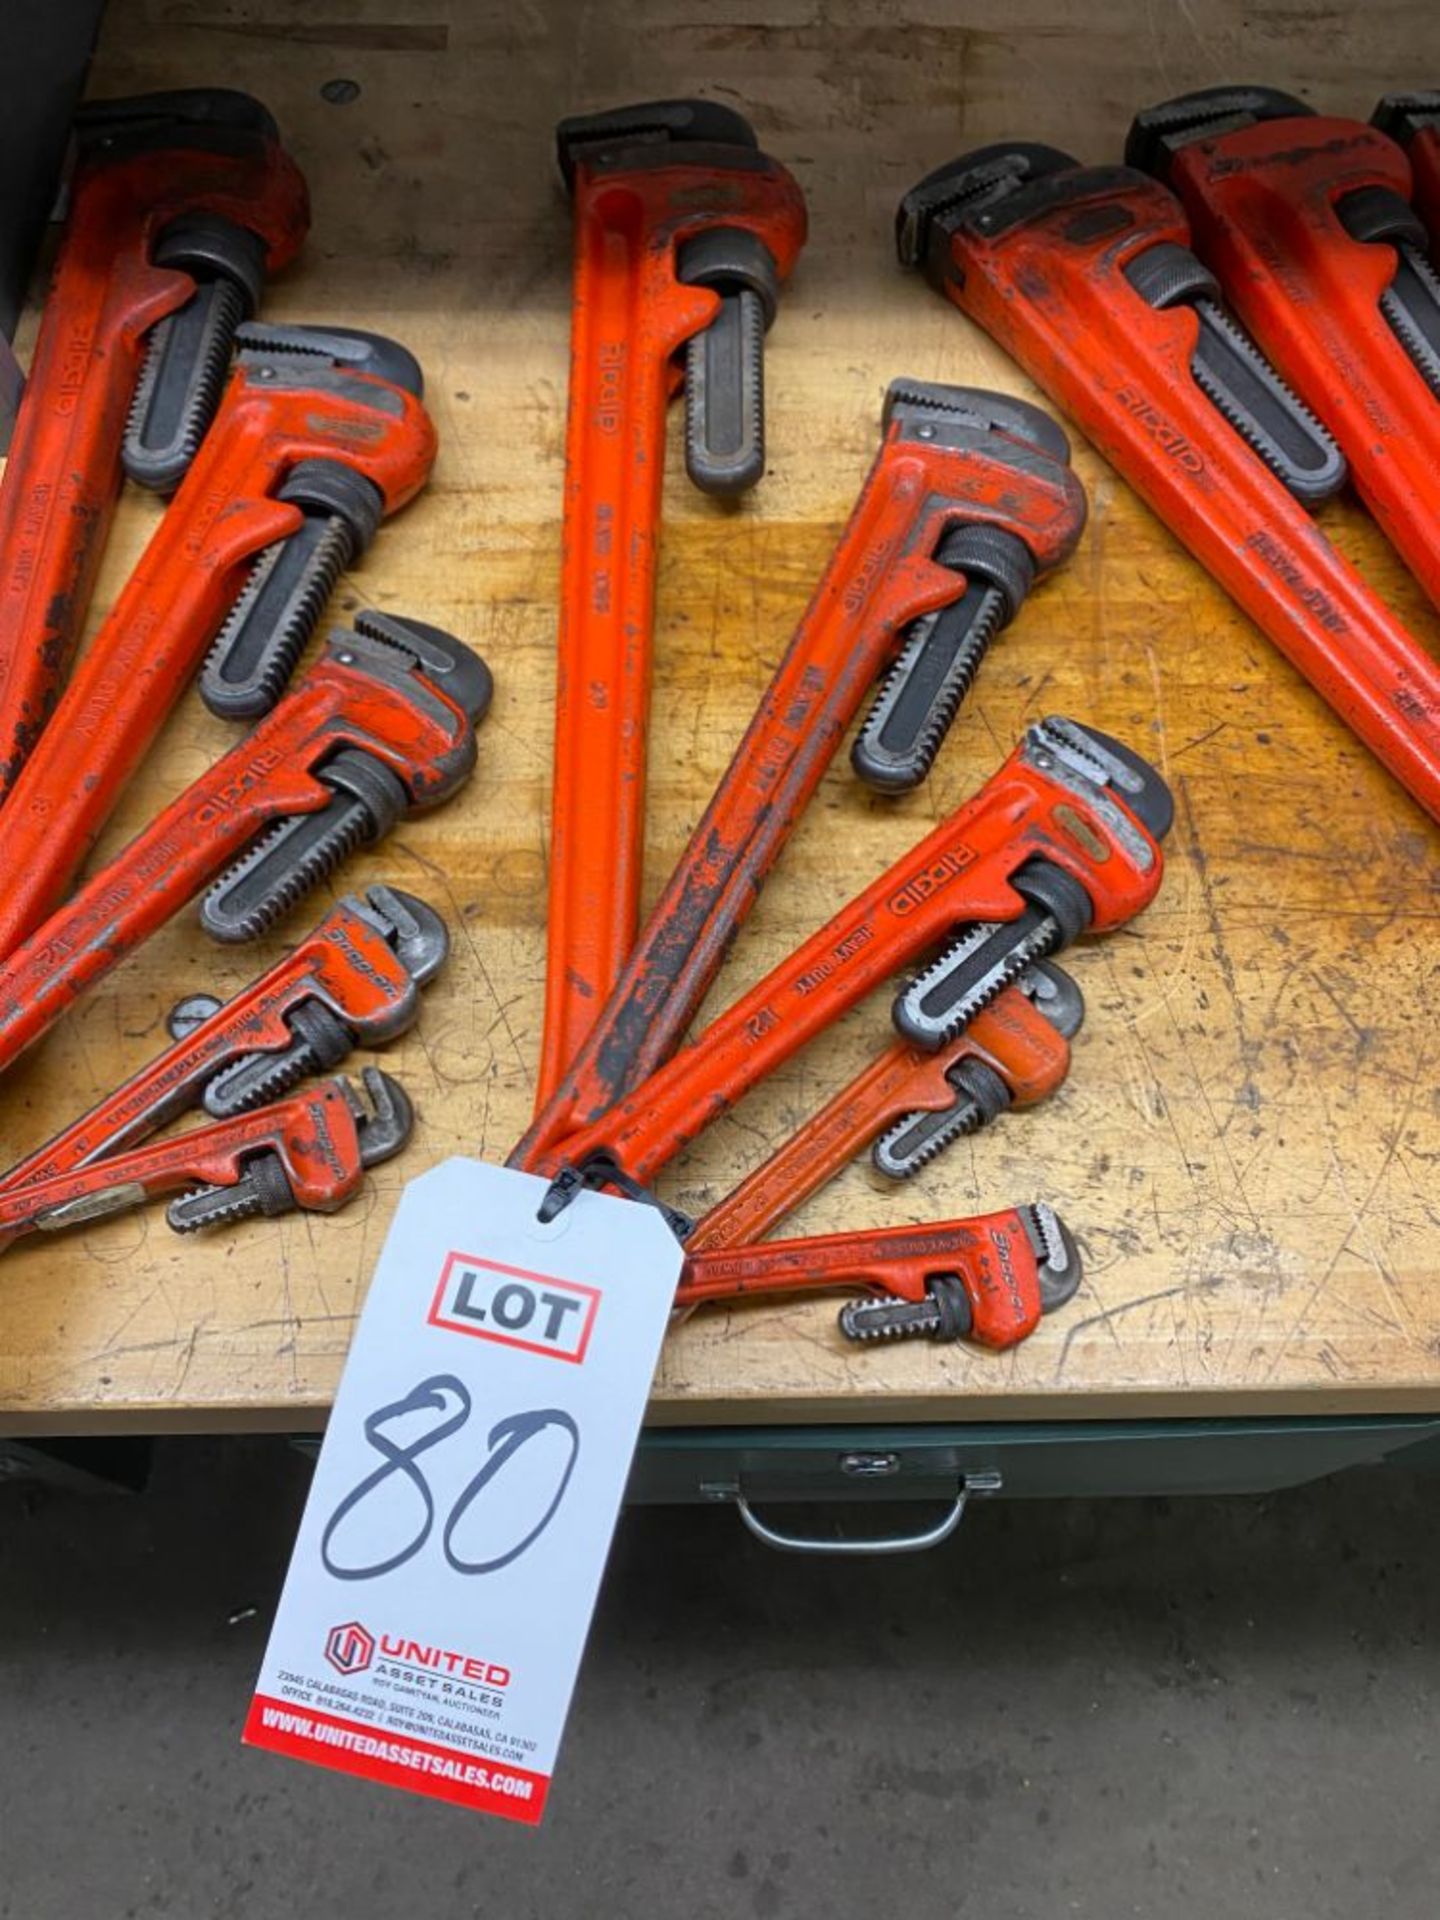 LOT - RIDGID &/OR SNAP-ON PIPE WRENCH SET: 24", 18", 12", 8", 6"